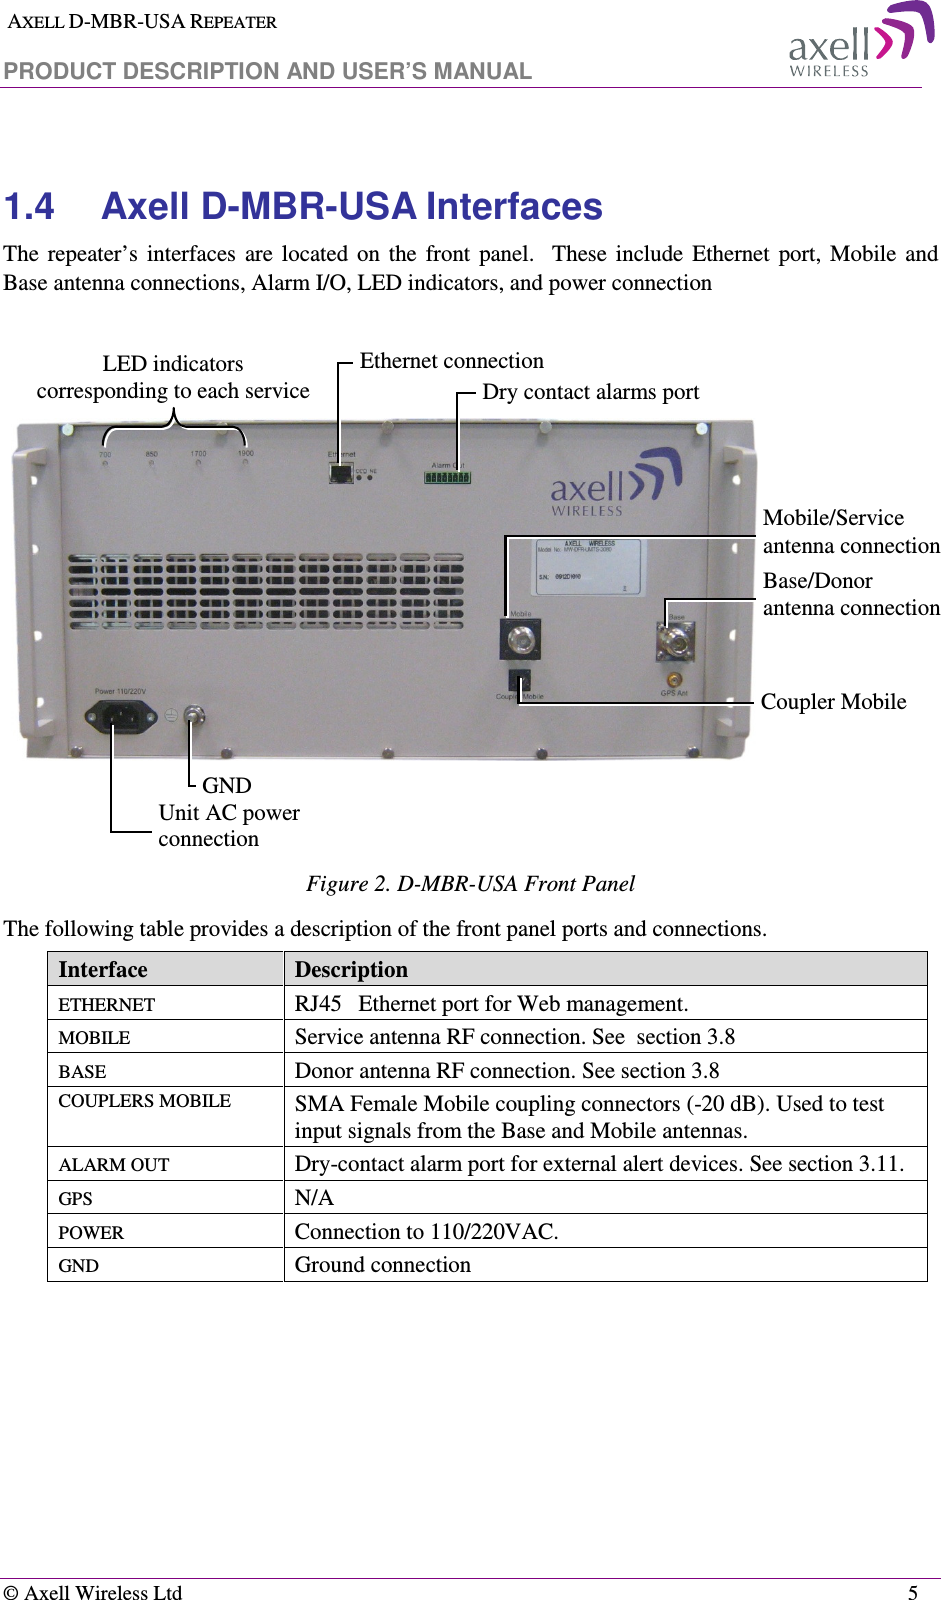  AXELL D-MBR-USA REPEATER  PRODUCT DESCRIPTION AND USER’S MANUAL   © Axell Wireless Ltd    5  1.4  Axell D-MBR-USA Interfaces The  repeater’s  interfaces  are  located  on  the  front  panel.    These  include  Ethernet  port,  Mobile  and Base antenna connections, Alarm I/O, LED indicators, and power connection         Figure 2. D-MBR-USA Front Panel The following table provides a description of the front panel ports and connections.  Interface  Description ETHERNET  RJ45   Ethernet port for Web management. MOBILE  Service antenna RF connection. See  section  3.8 BASE   Donor antenna RF connection. See section  3.8 COUPLERS MOBILE SMA Female Mobile coupling connectors (-20 dB). Used to test input signals from the Base and Mobile antennas. ALARM OUT  Dry-contact alarm port for external alert devices. See section  3.11. GPS   N/A POWER   Connection to 110/220VAC.  GND  Ground connection      Unit AC power connection Mobile/Service antenna connection LED indicators corresponding to each service Ethernet connection Dry contact alarms port Base/Donor antenna connection Coupler Mobile GND 